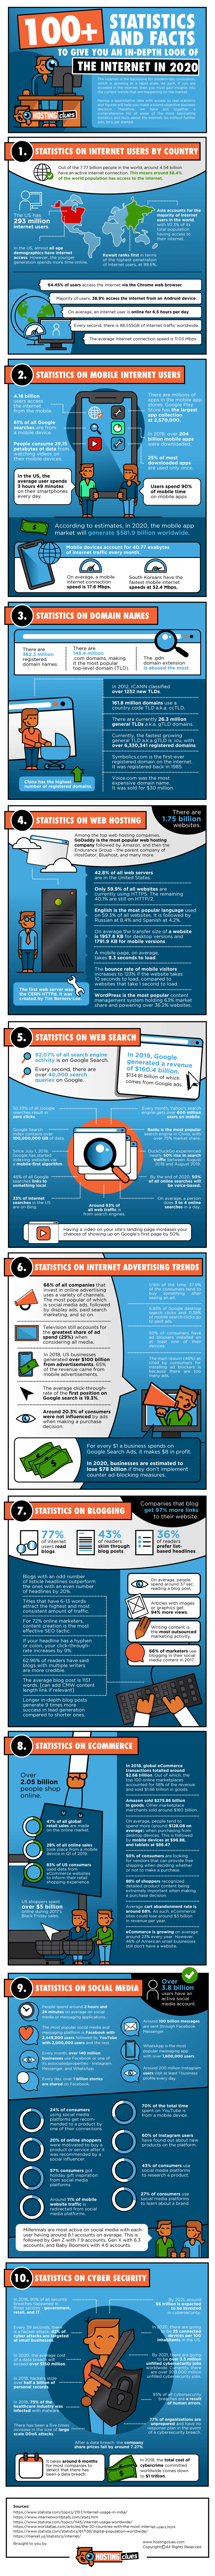 100+ Statistics And Facts About the Internet by HostingClues.com